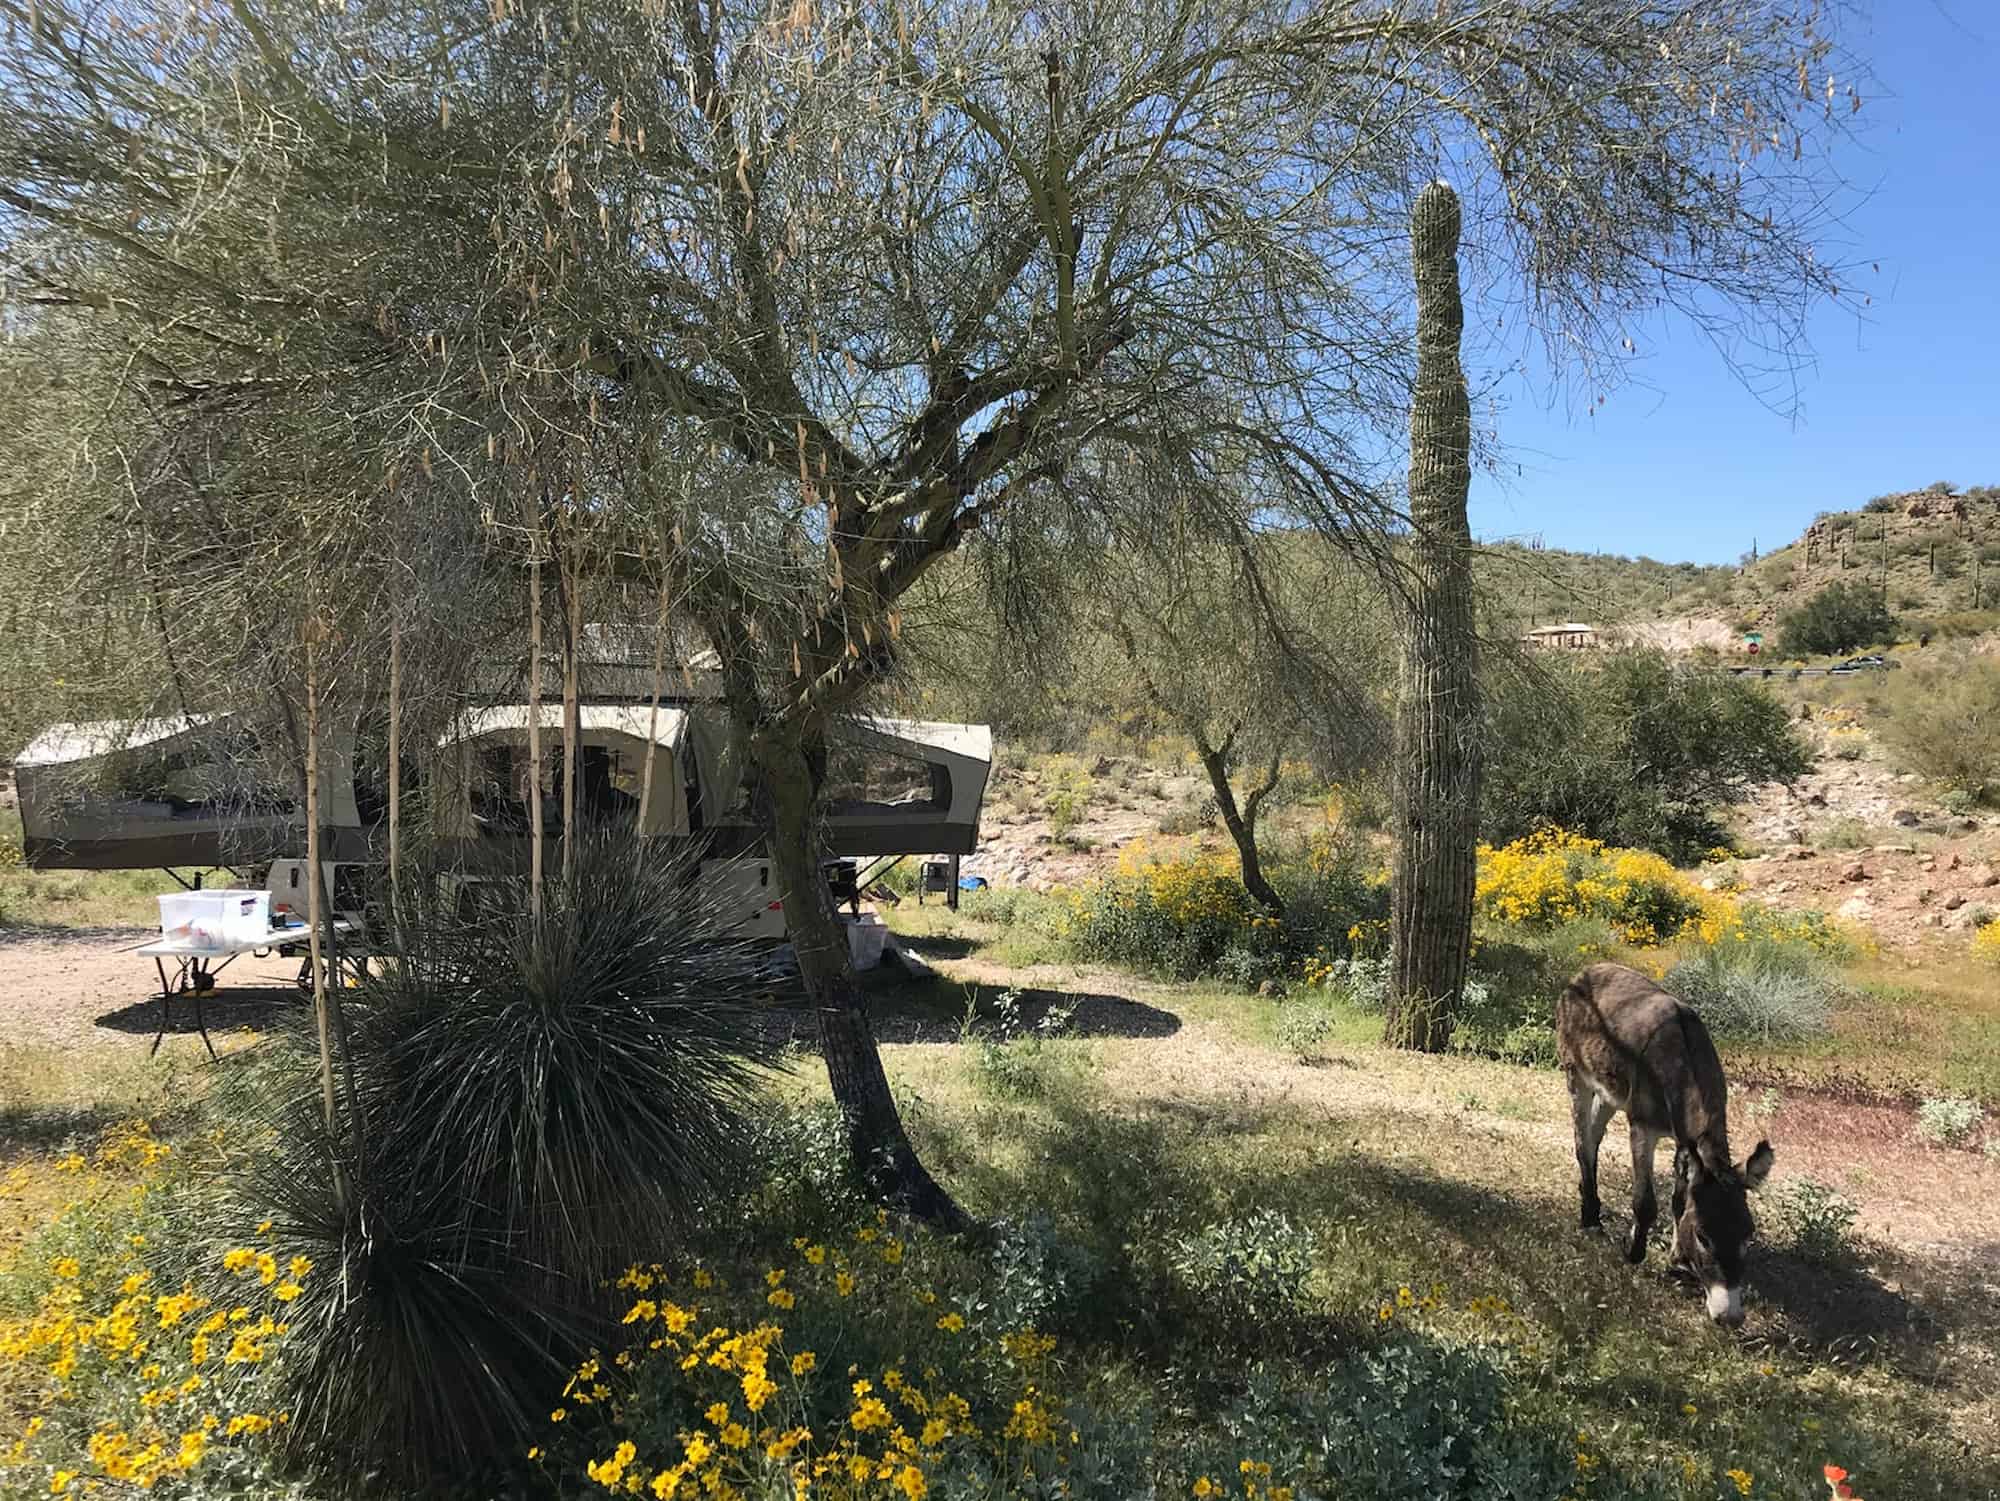 Donkey grazing in front of wildflowers and cacti and an RV at Lake Pleasant Campsite outside of Phoenix.